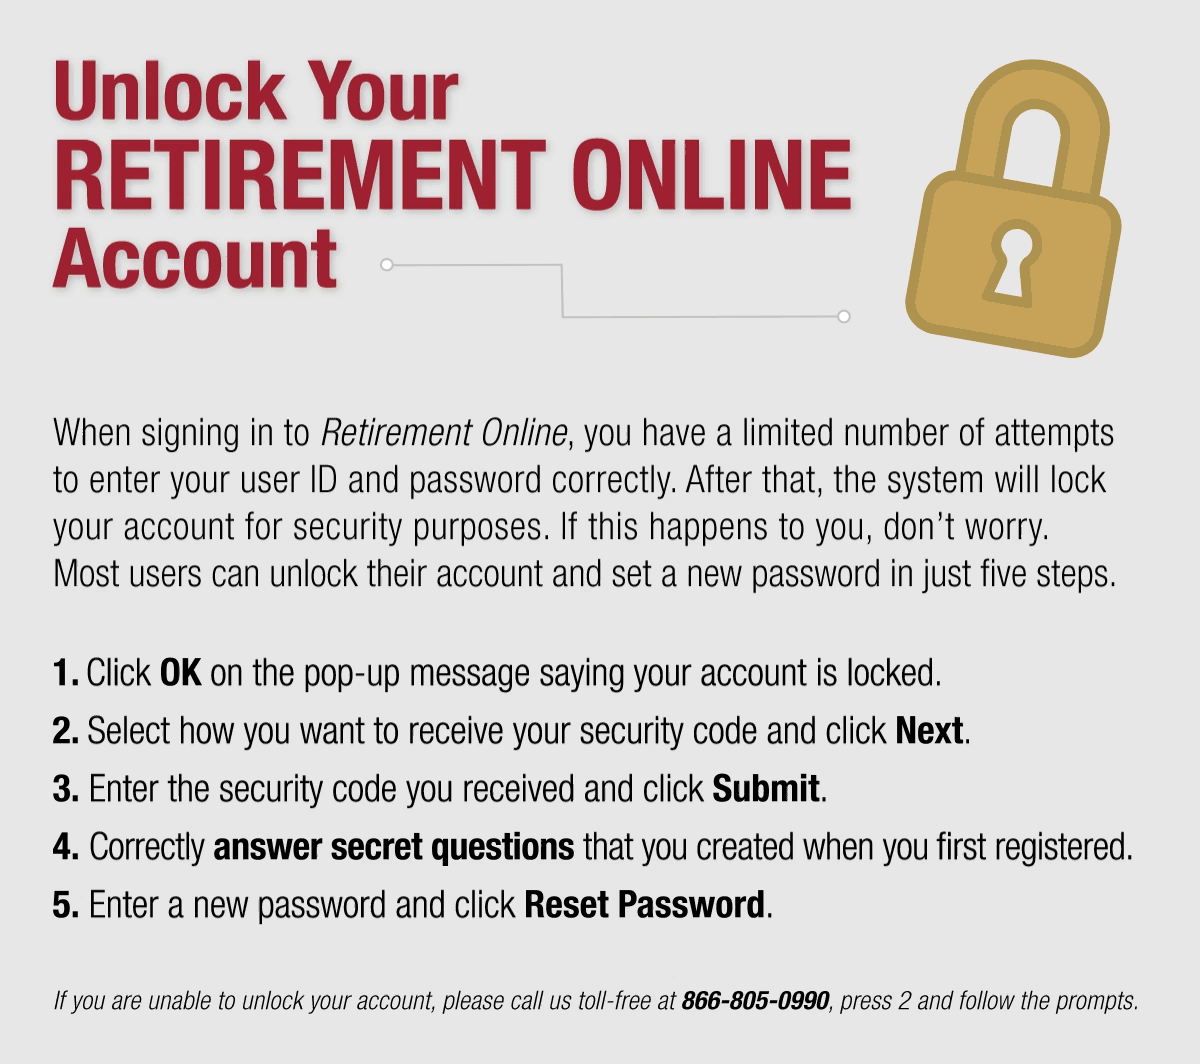 Steps for Unlocking Your Retirement Online Account